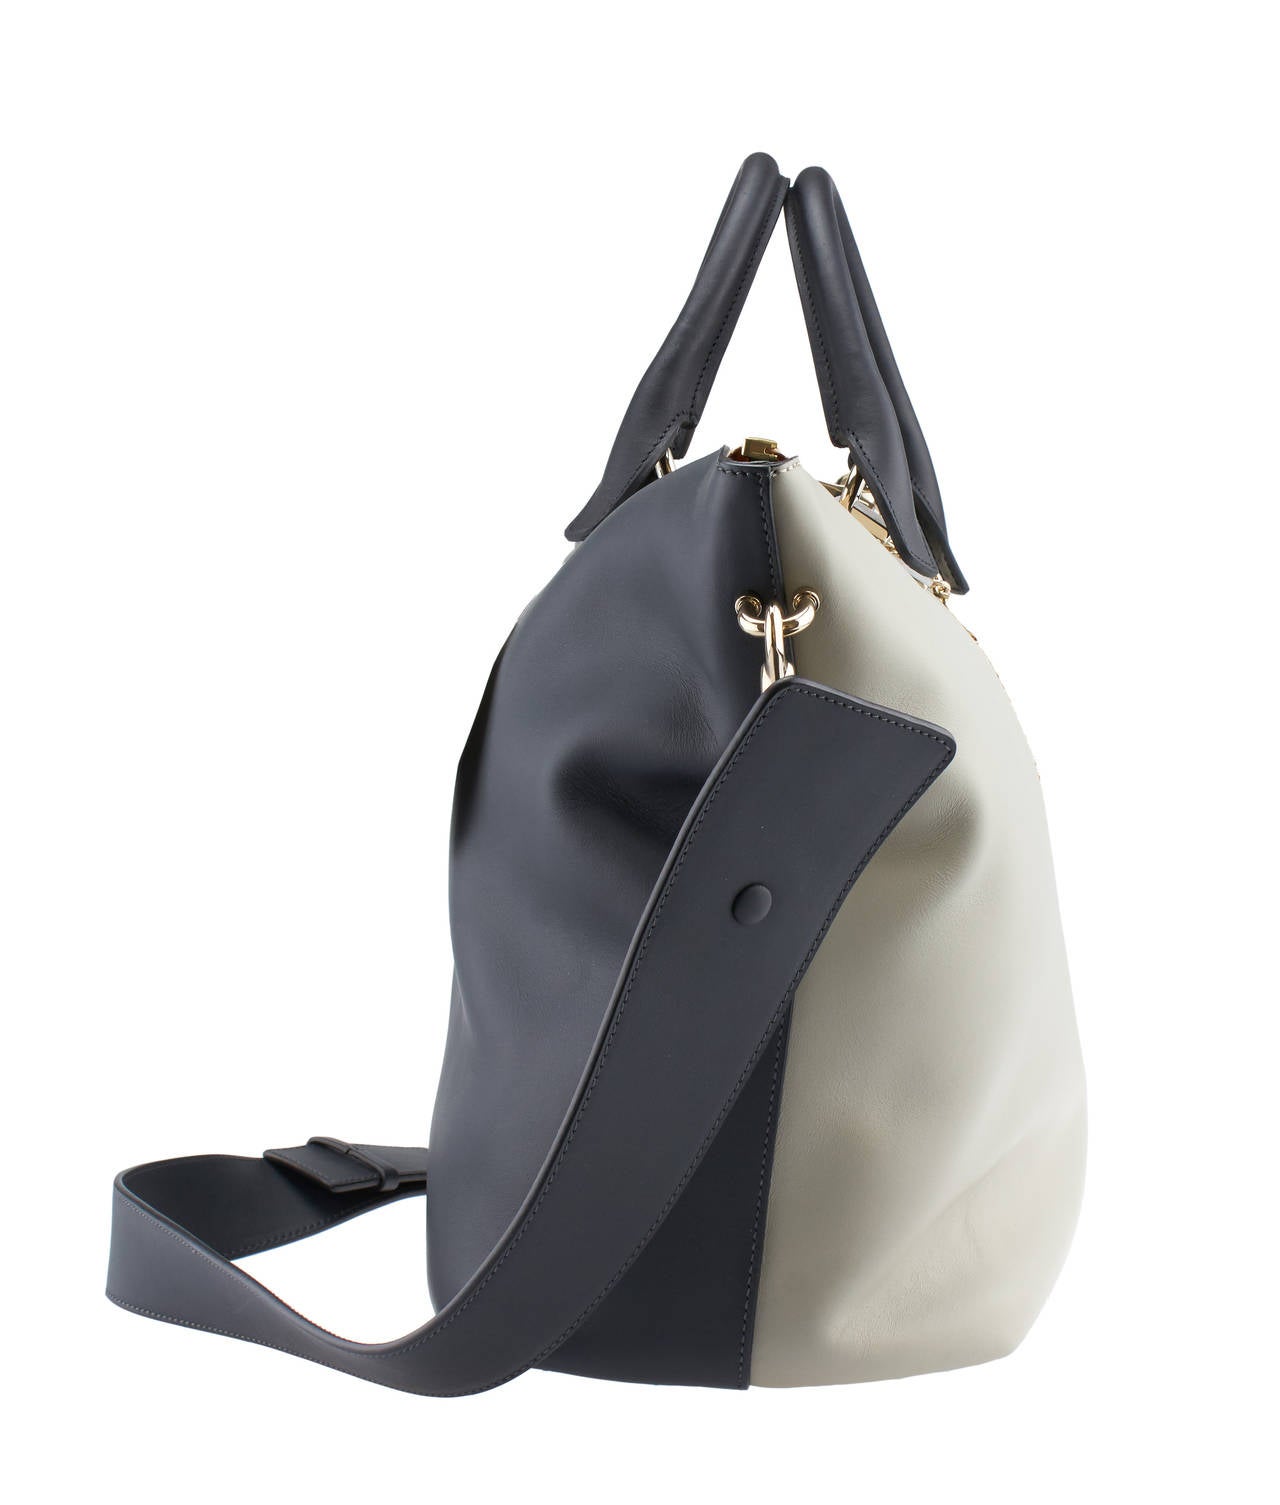 Chloe 2014 Baylee Colorblock Grey & Black Leather Zip Tote In Excellent Condition For Sale In Bala Cynwyd, PA